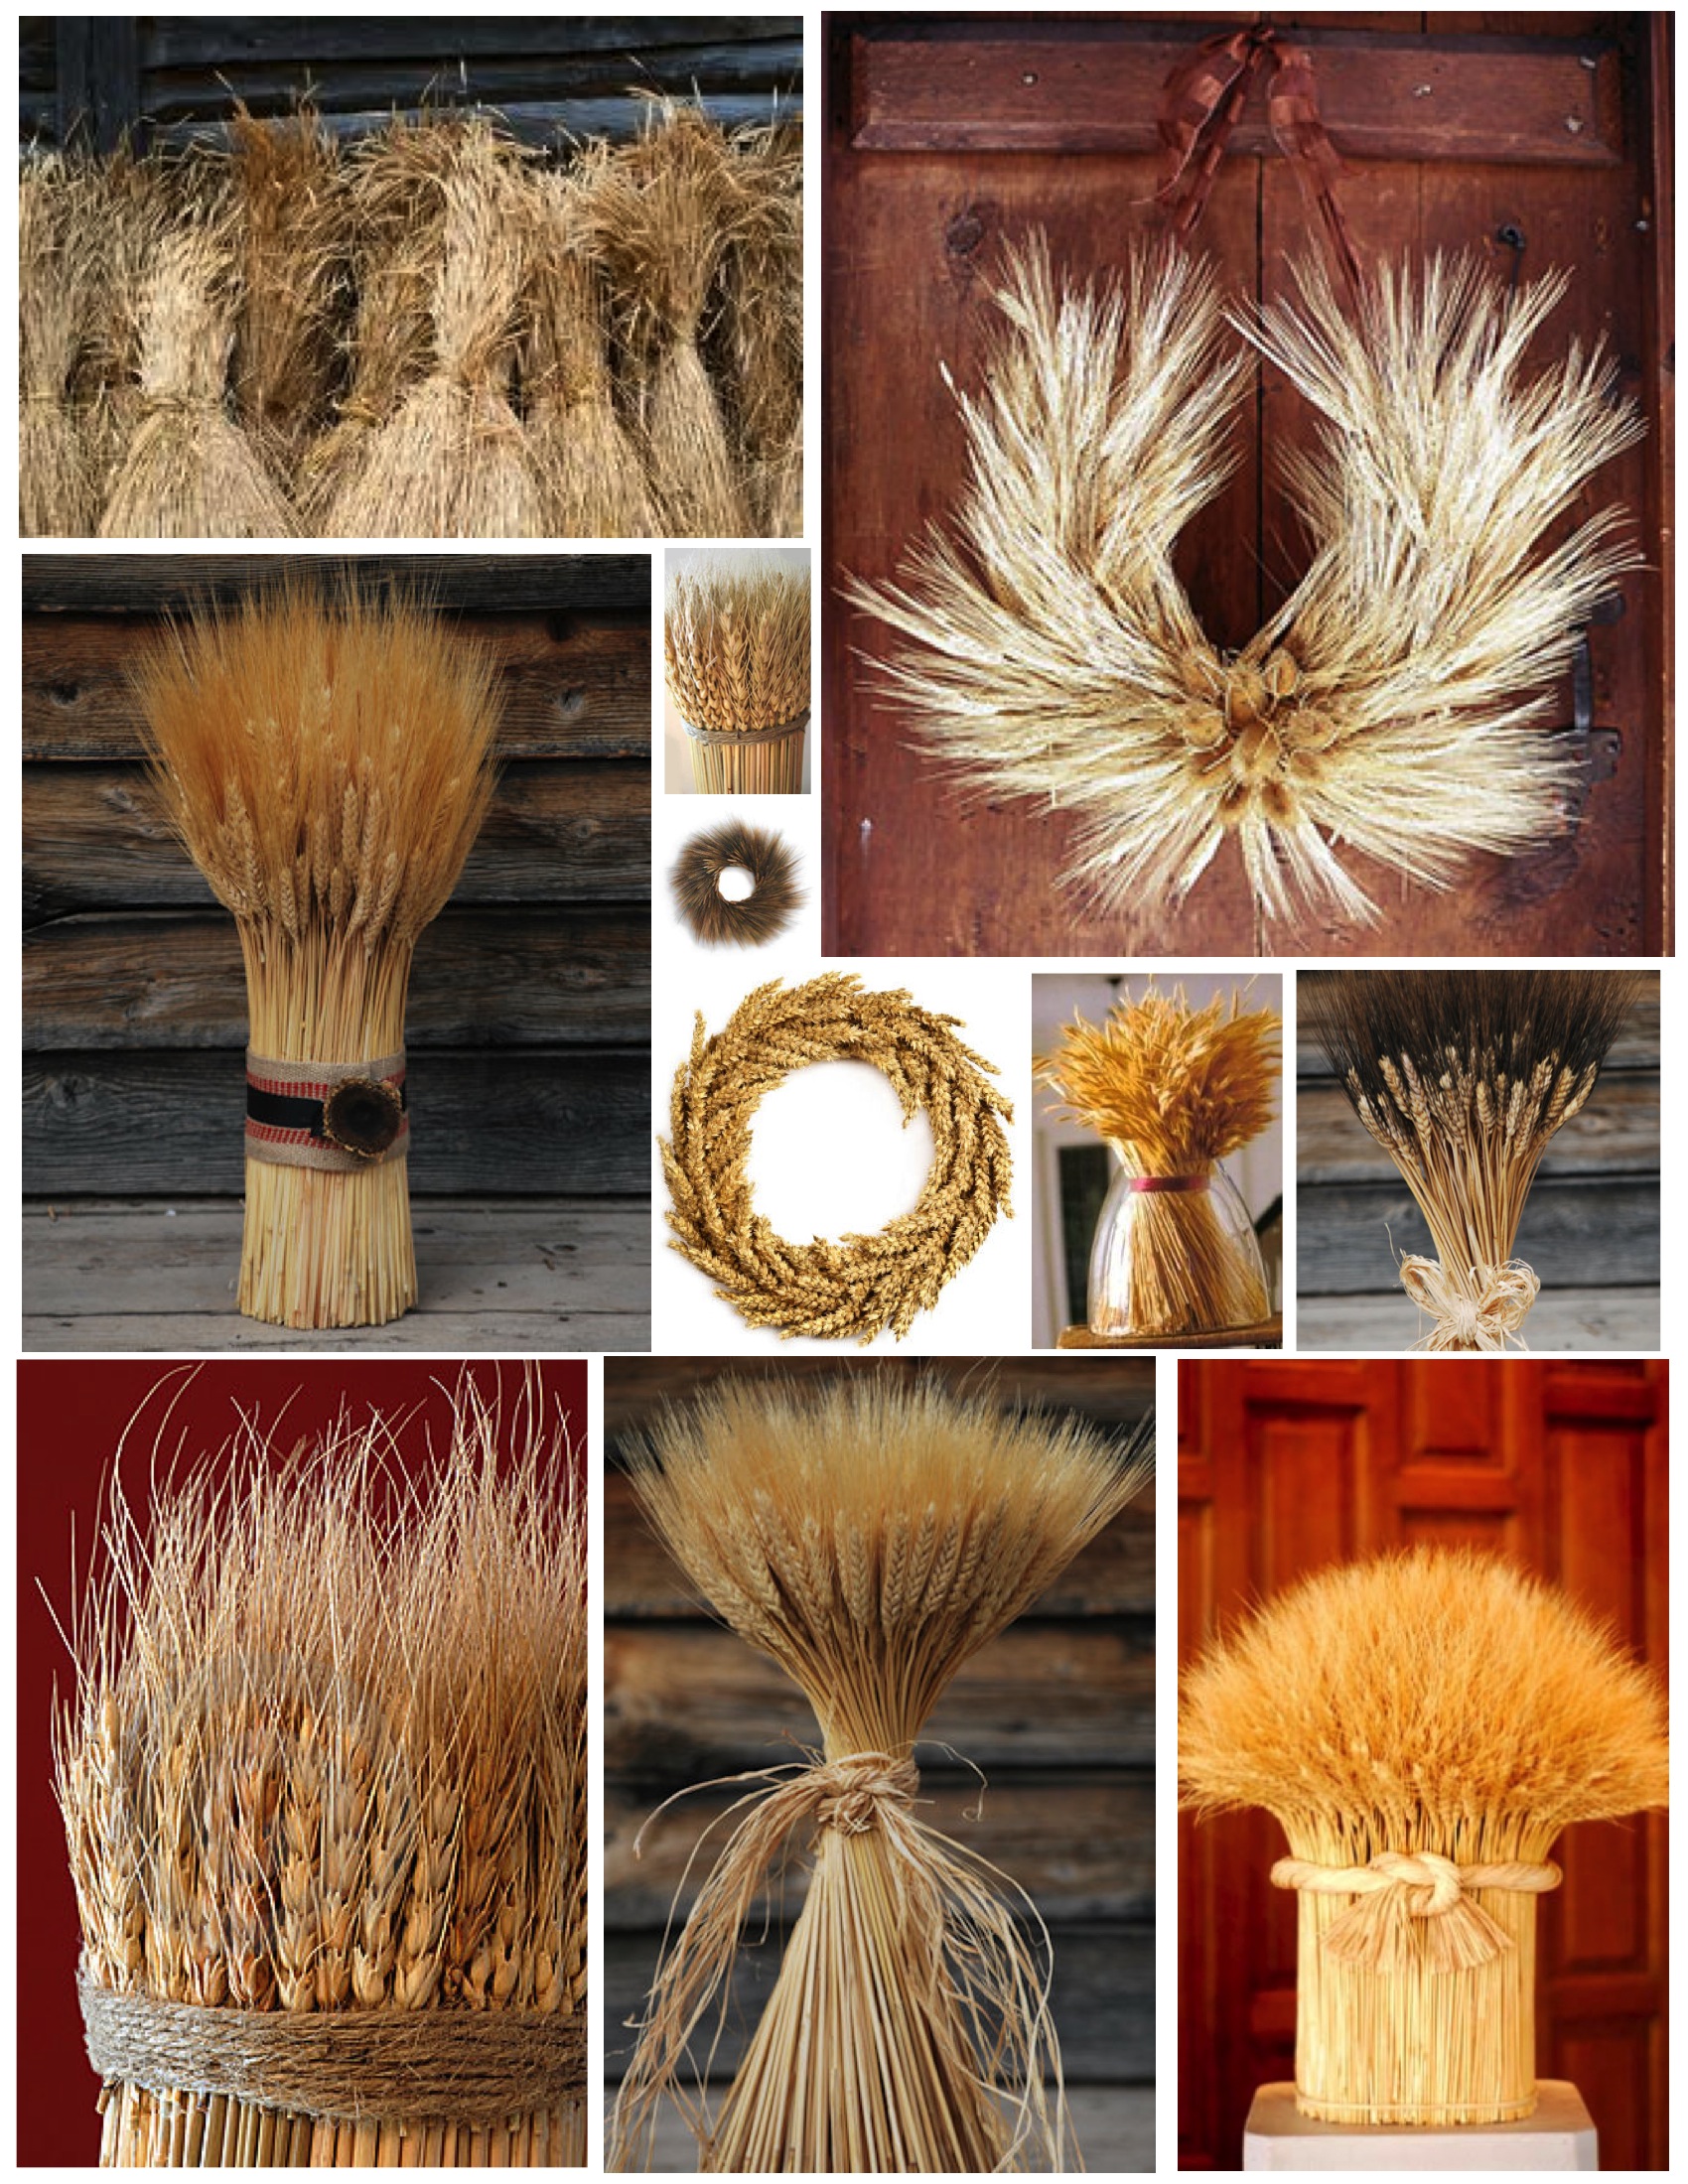 The Natural Appeal Of Interior A Bounty Appeal House Style Wheat: Of | Within The